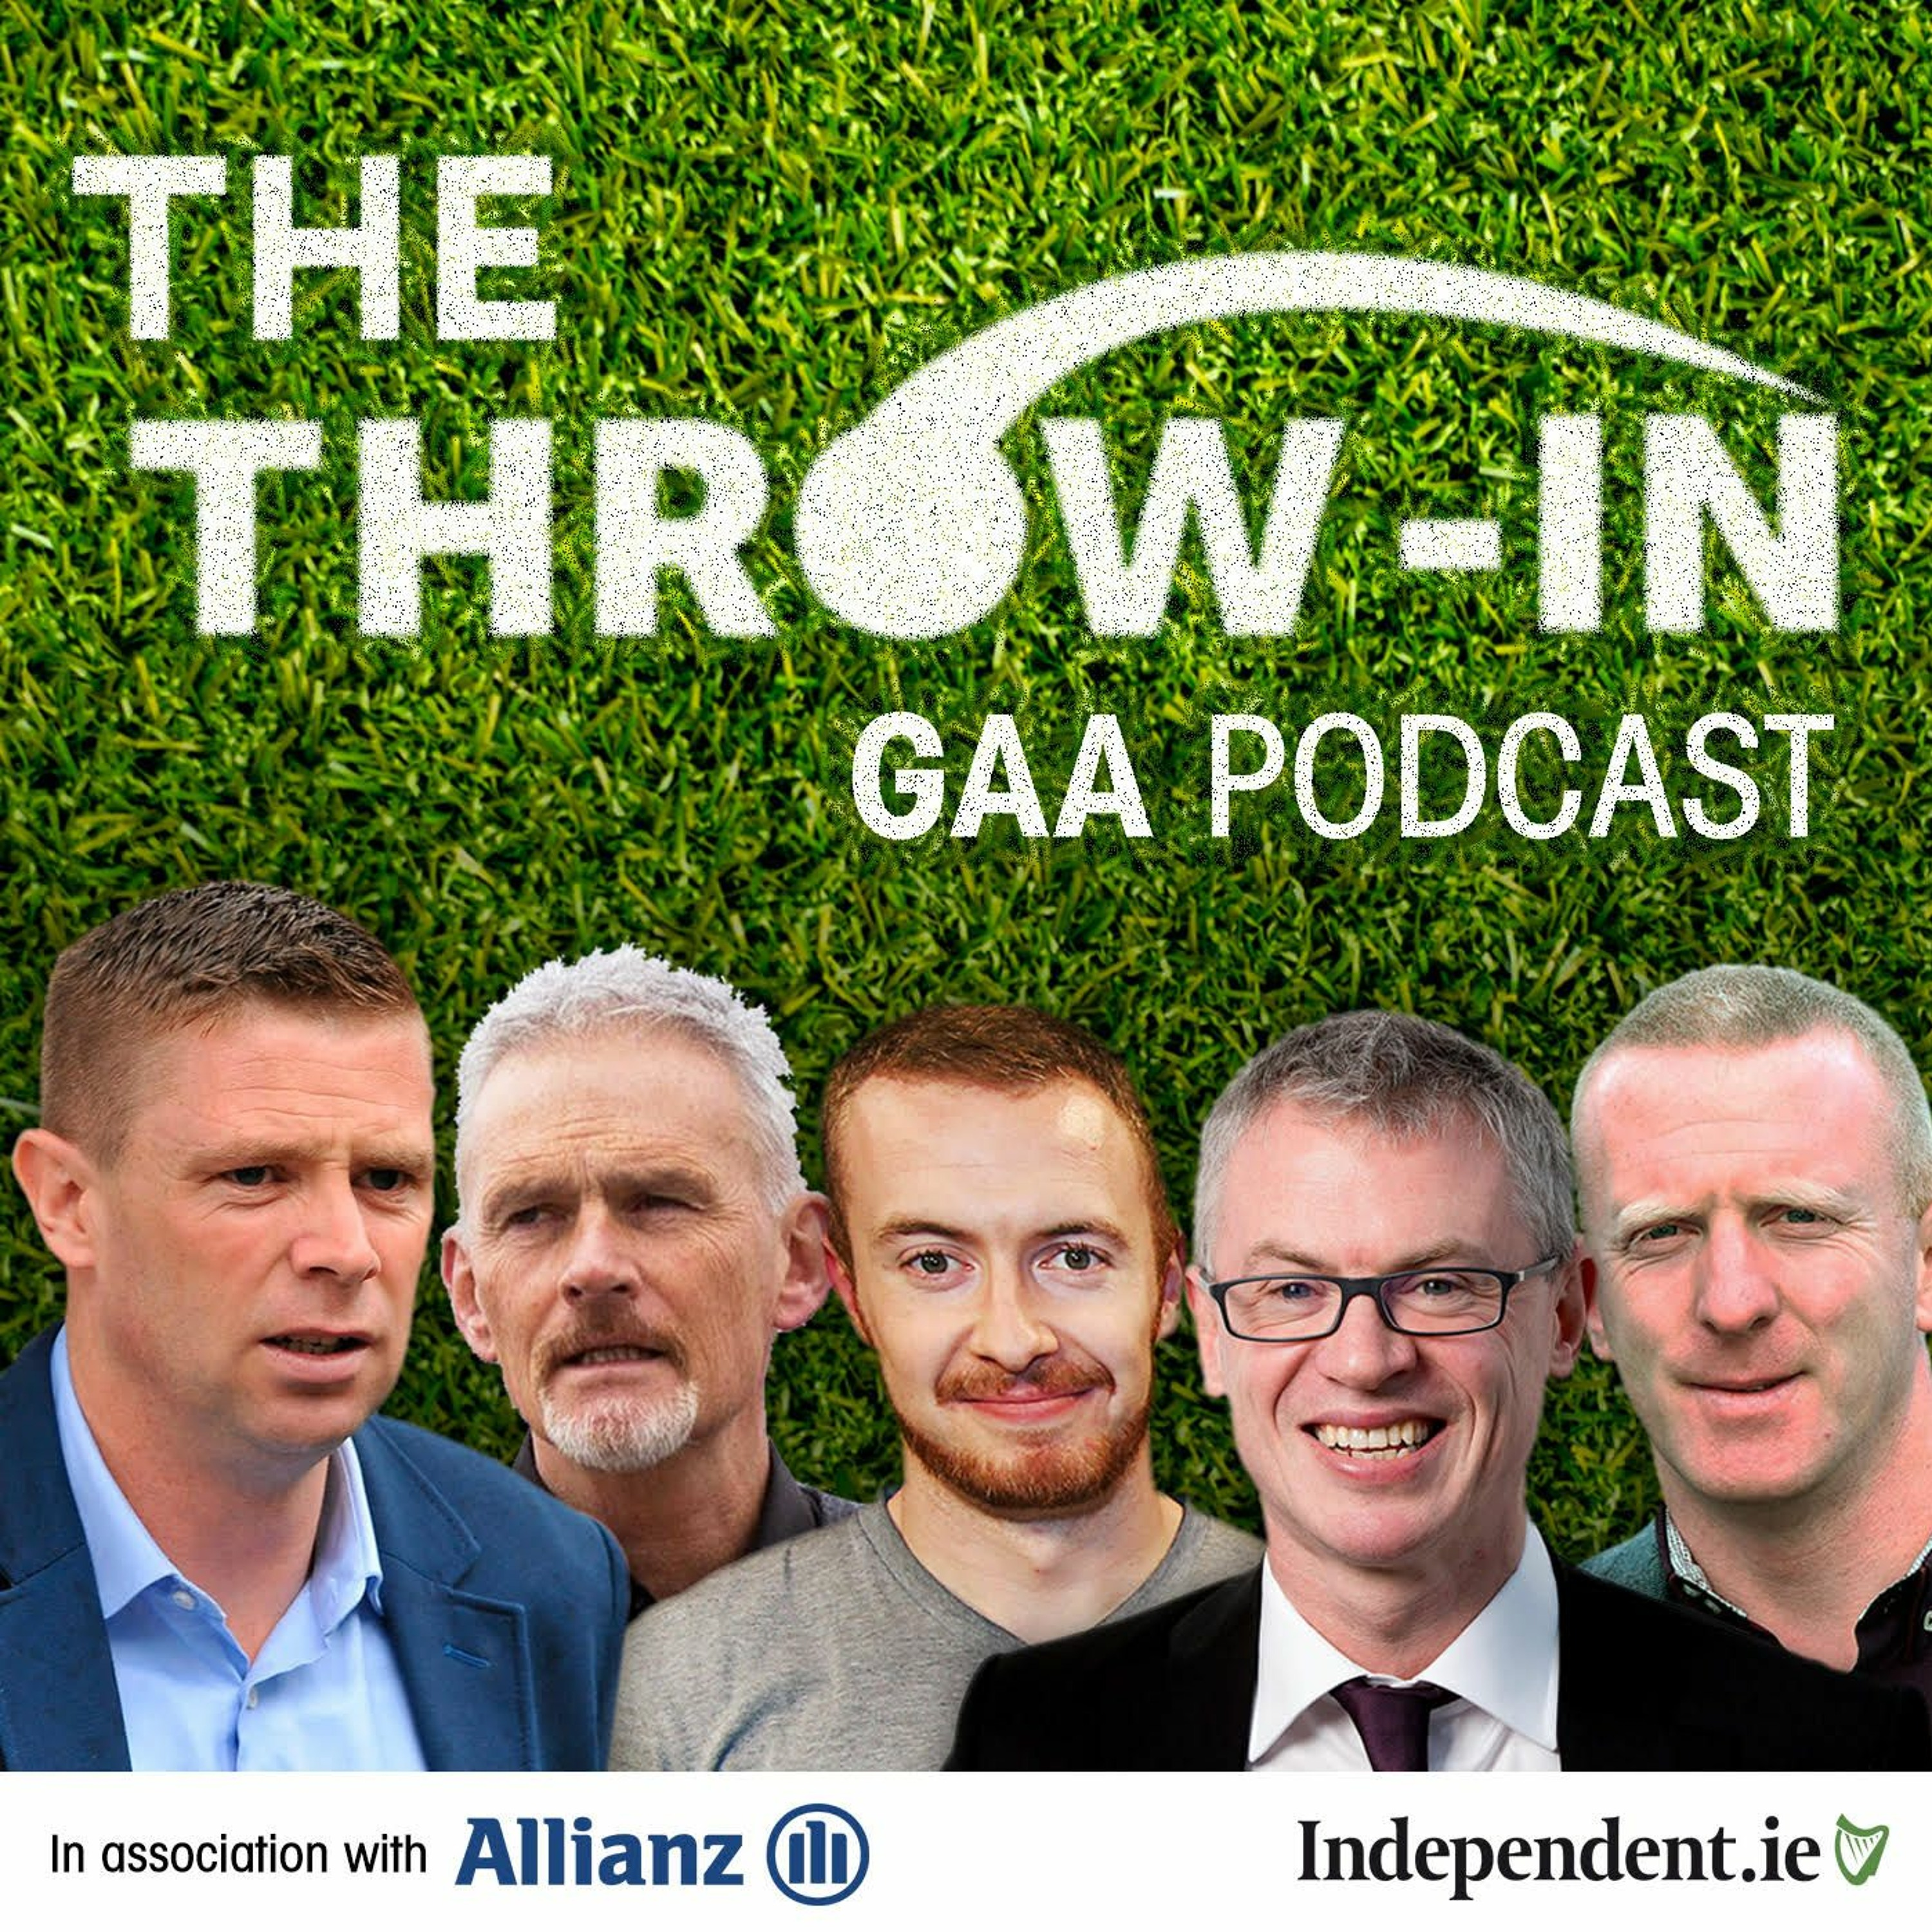 Hurling Review: the big guns under pressure and watch out for Cork